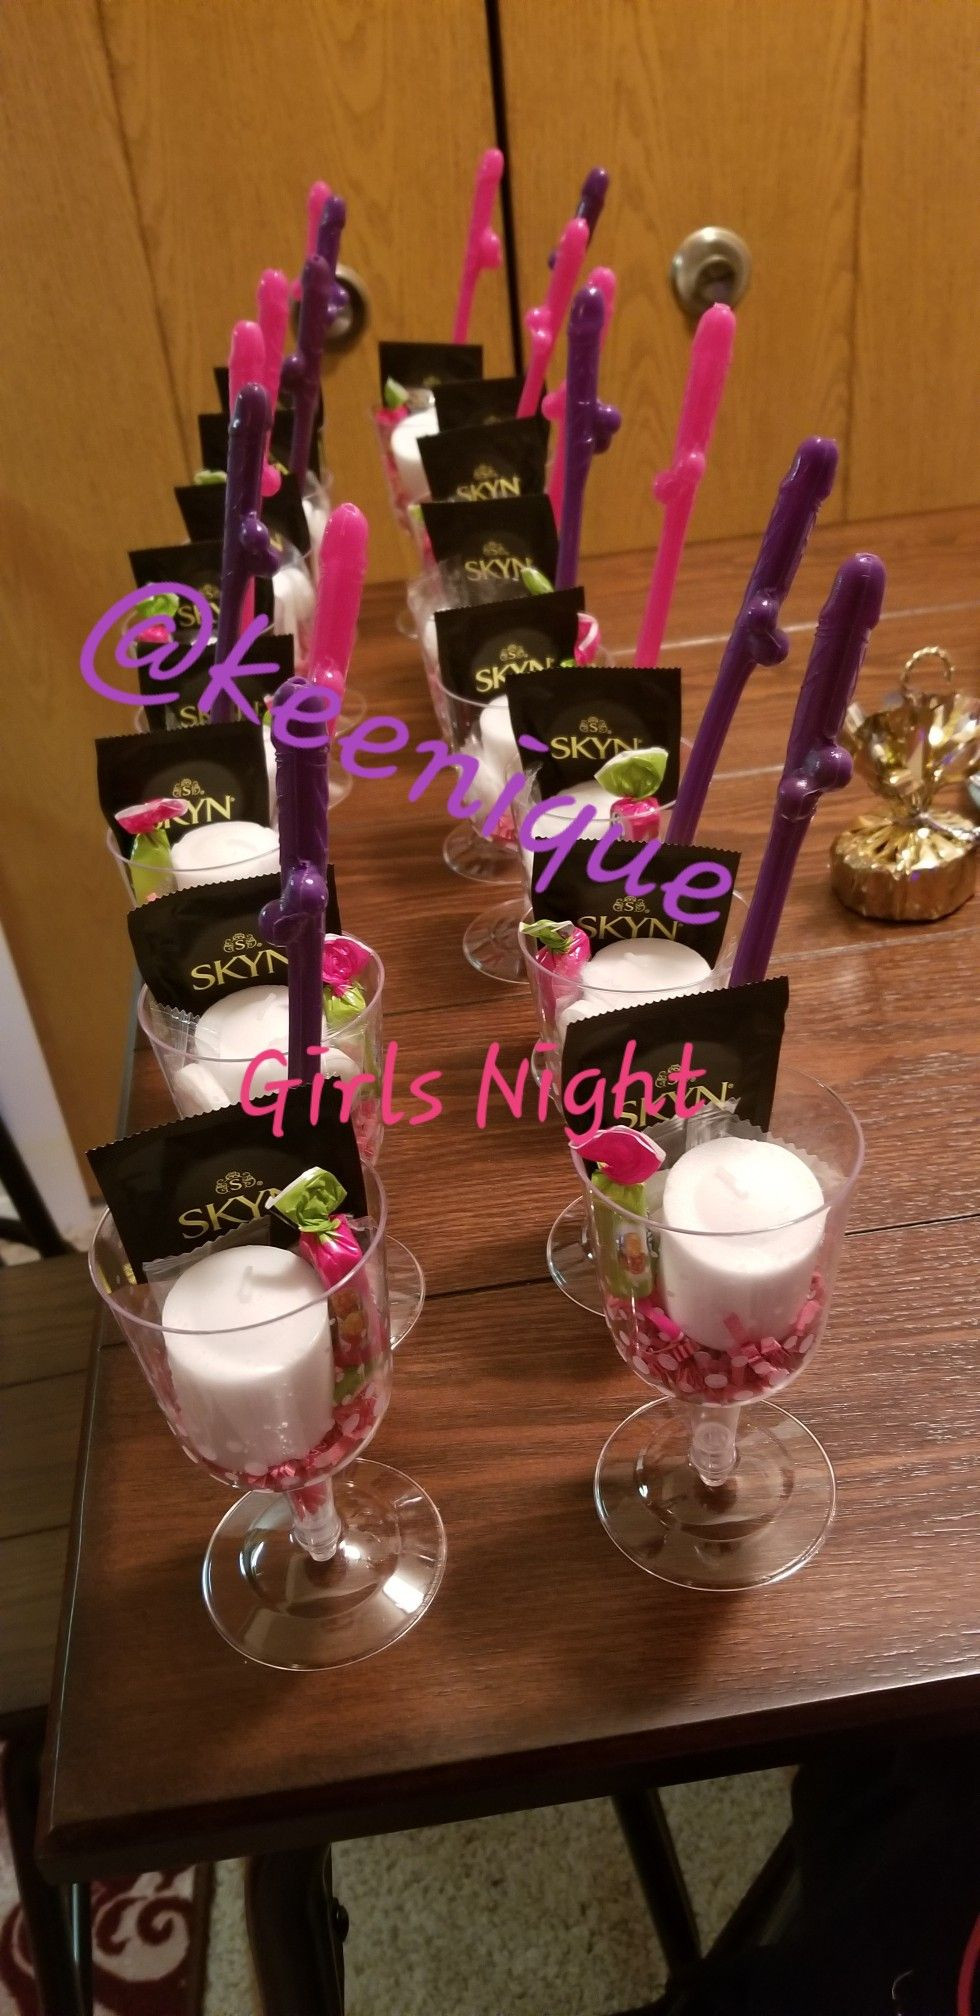 Girls Night Out Gift Ideas
 Girls Night Party Favor Gifts